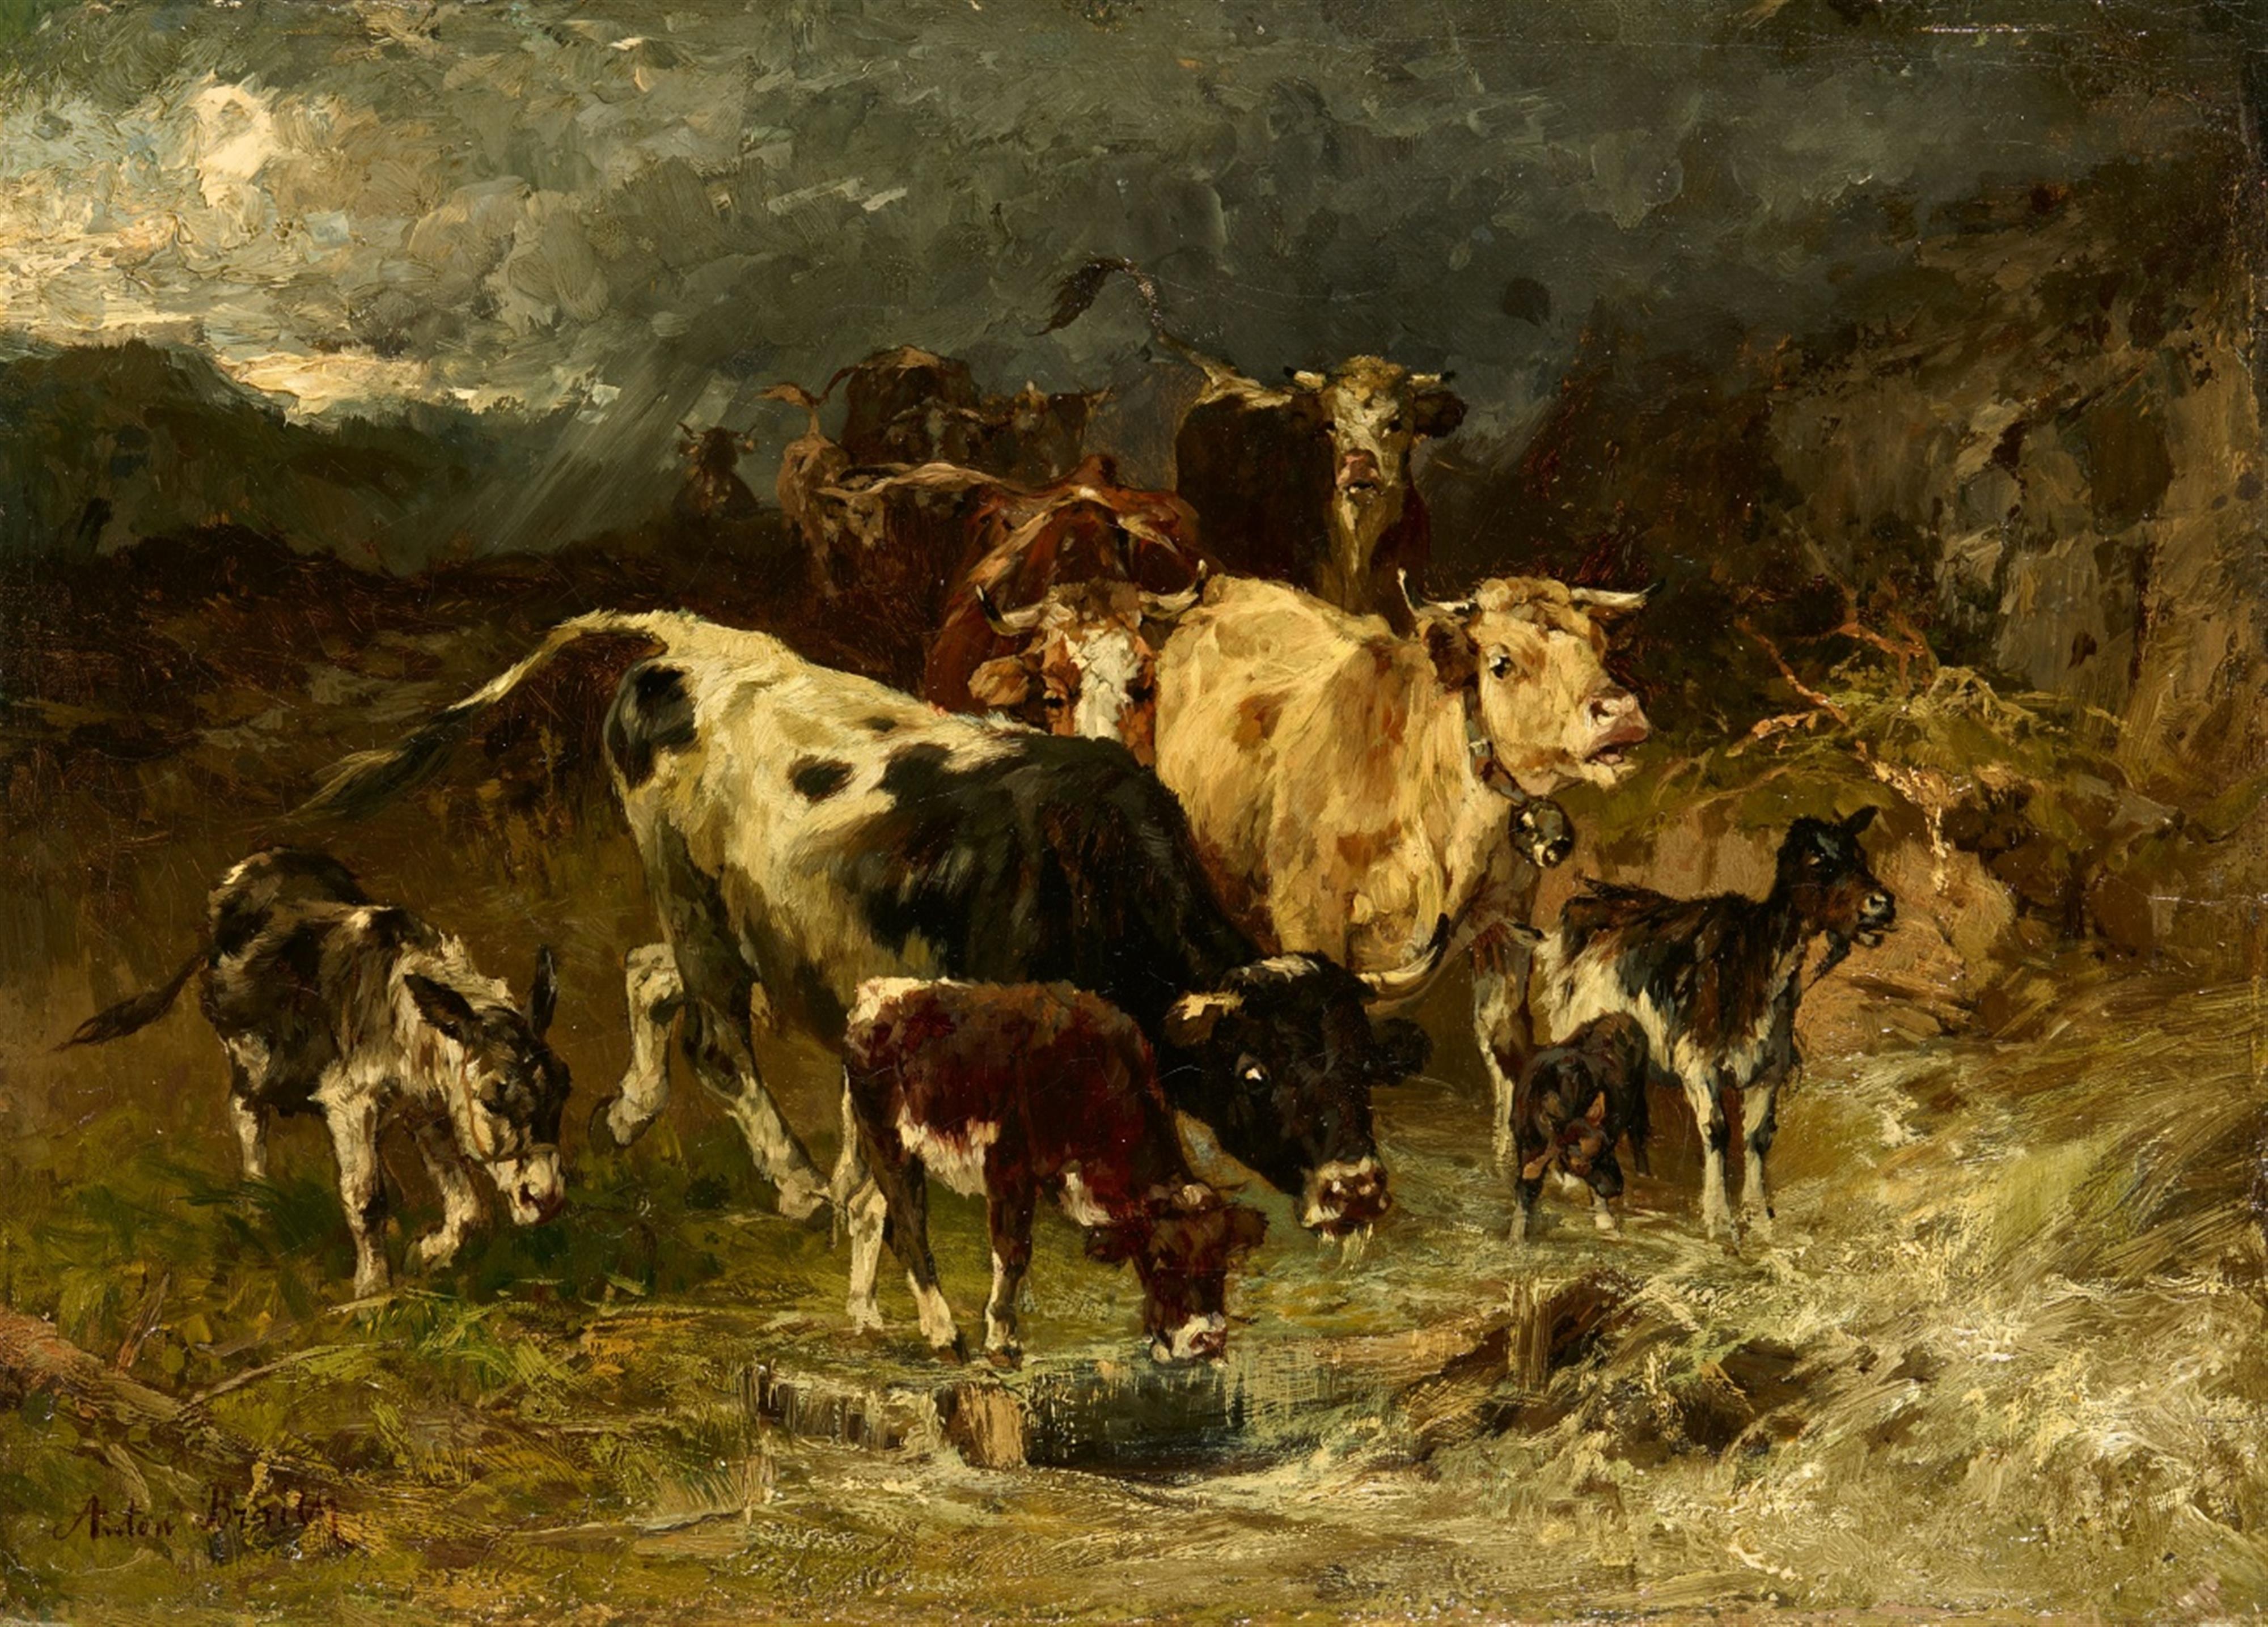 Anton Braith - Cows by a Collapsed Bridge over a Mountain Stream - image-1